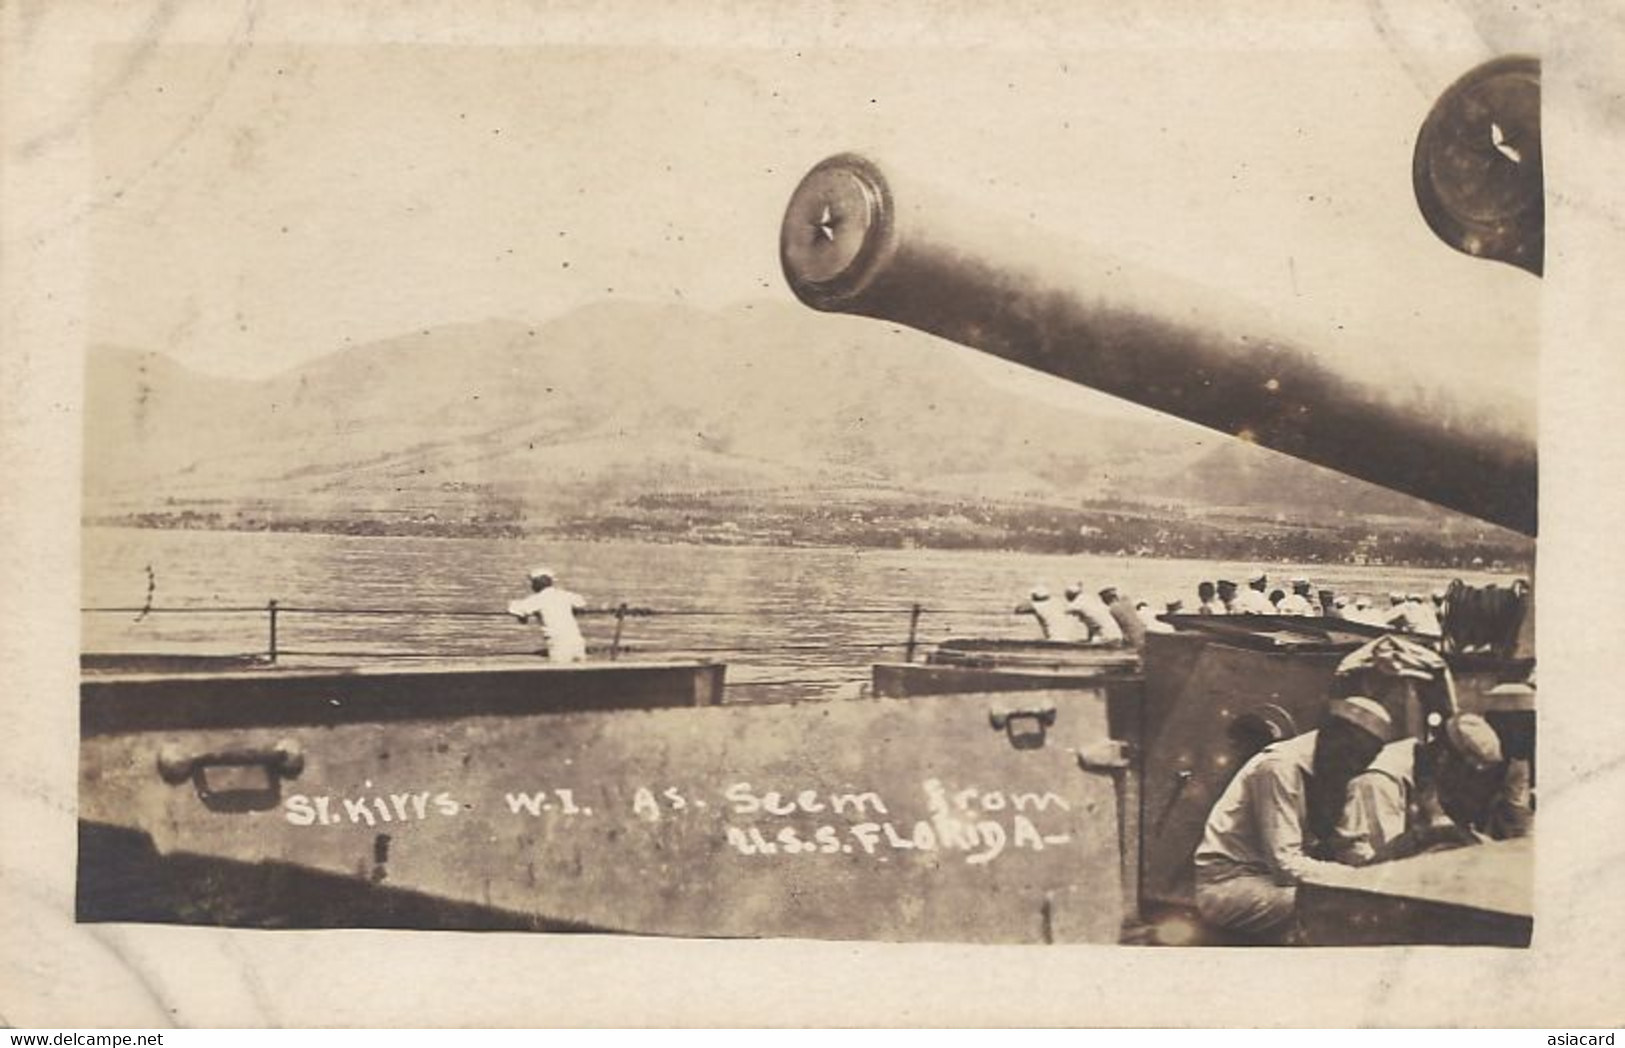 St Kitts Real Photo As Seen From U.S.S.  " Florida " War Ship  B.W.I. - Saint Kitts And Nevis